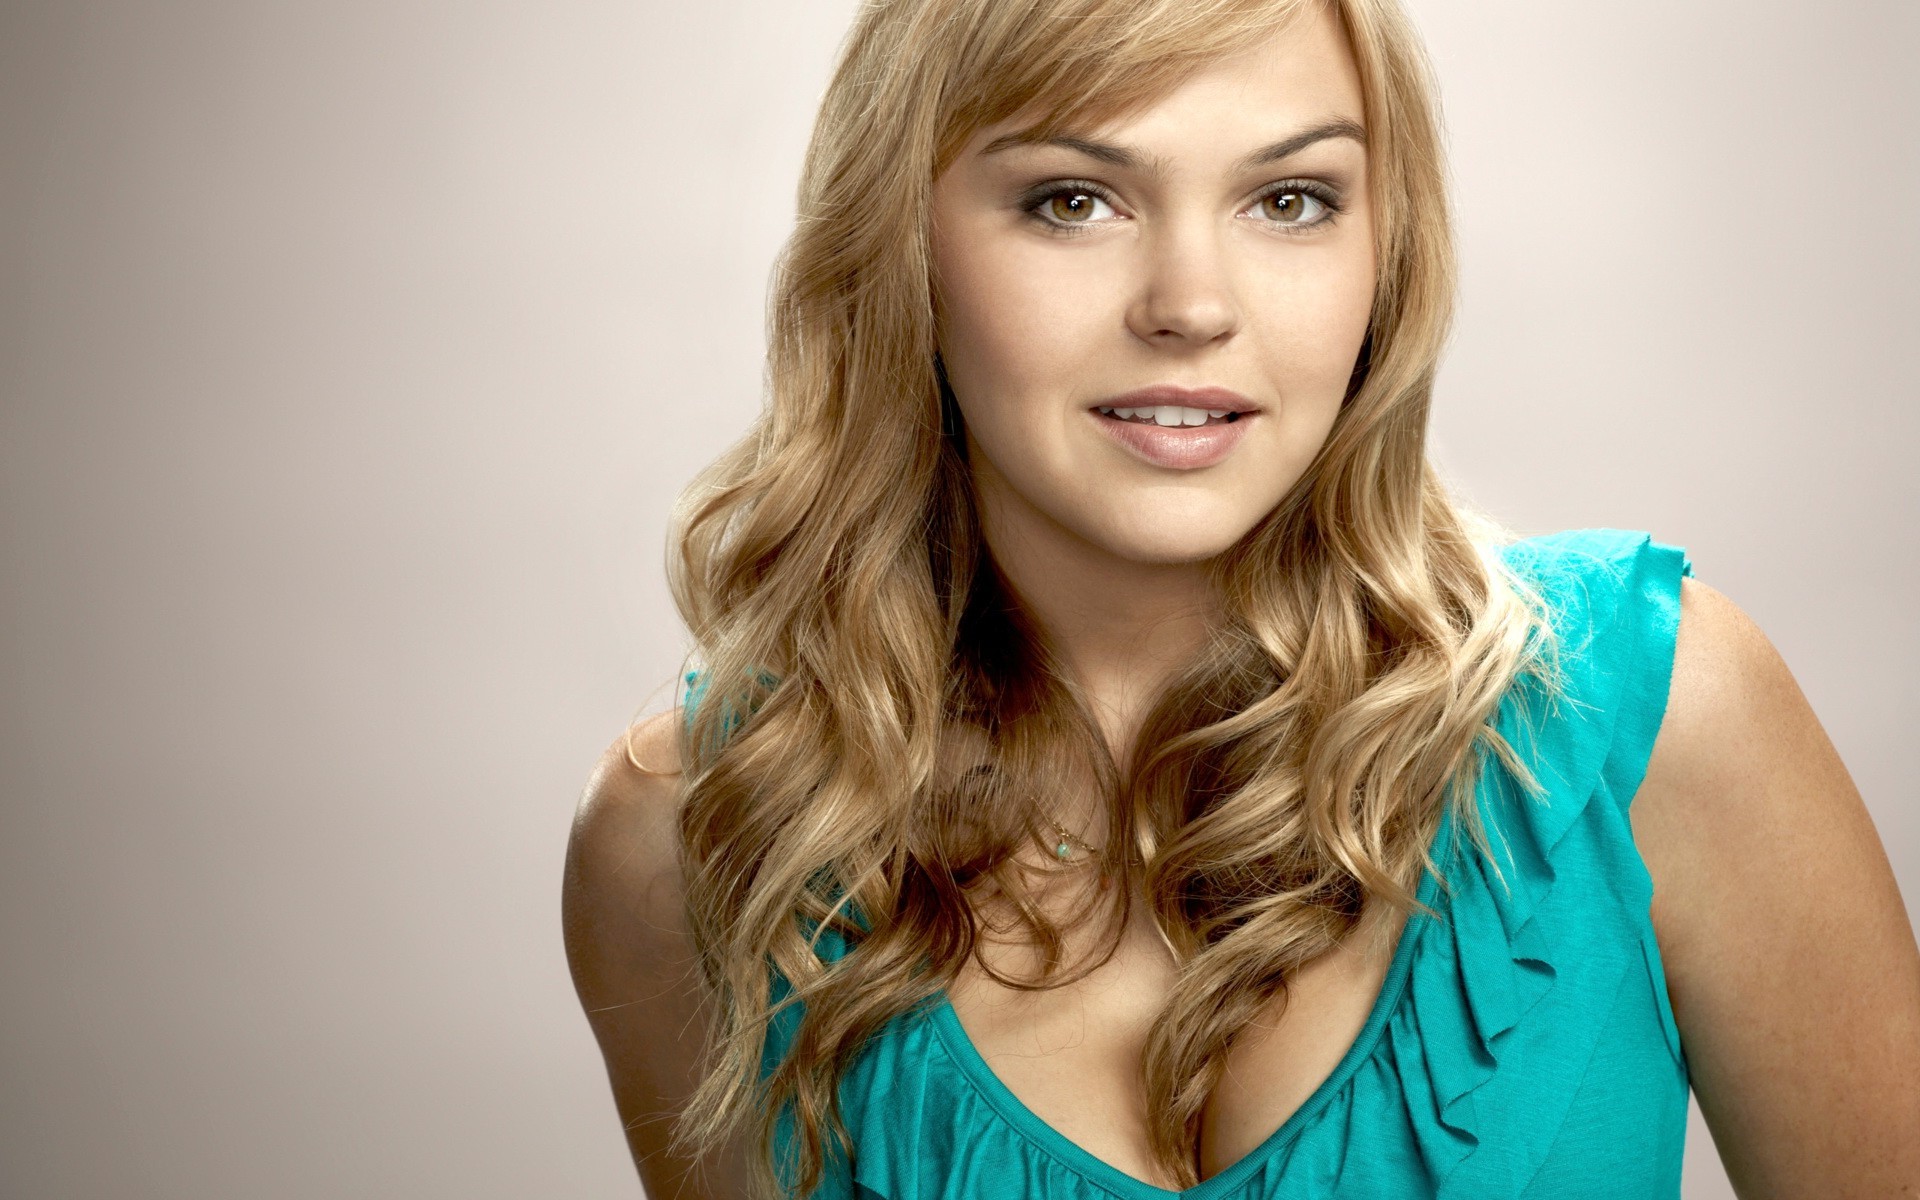 Please check our latest widescreen hd wallpaper below and bring beauty to your desktop. Aimee Teegarden HD Wallpaper